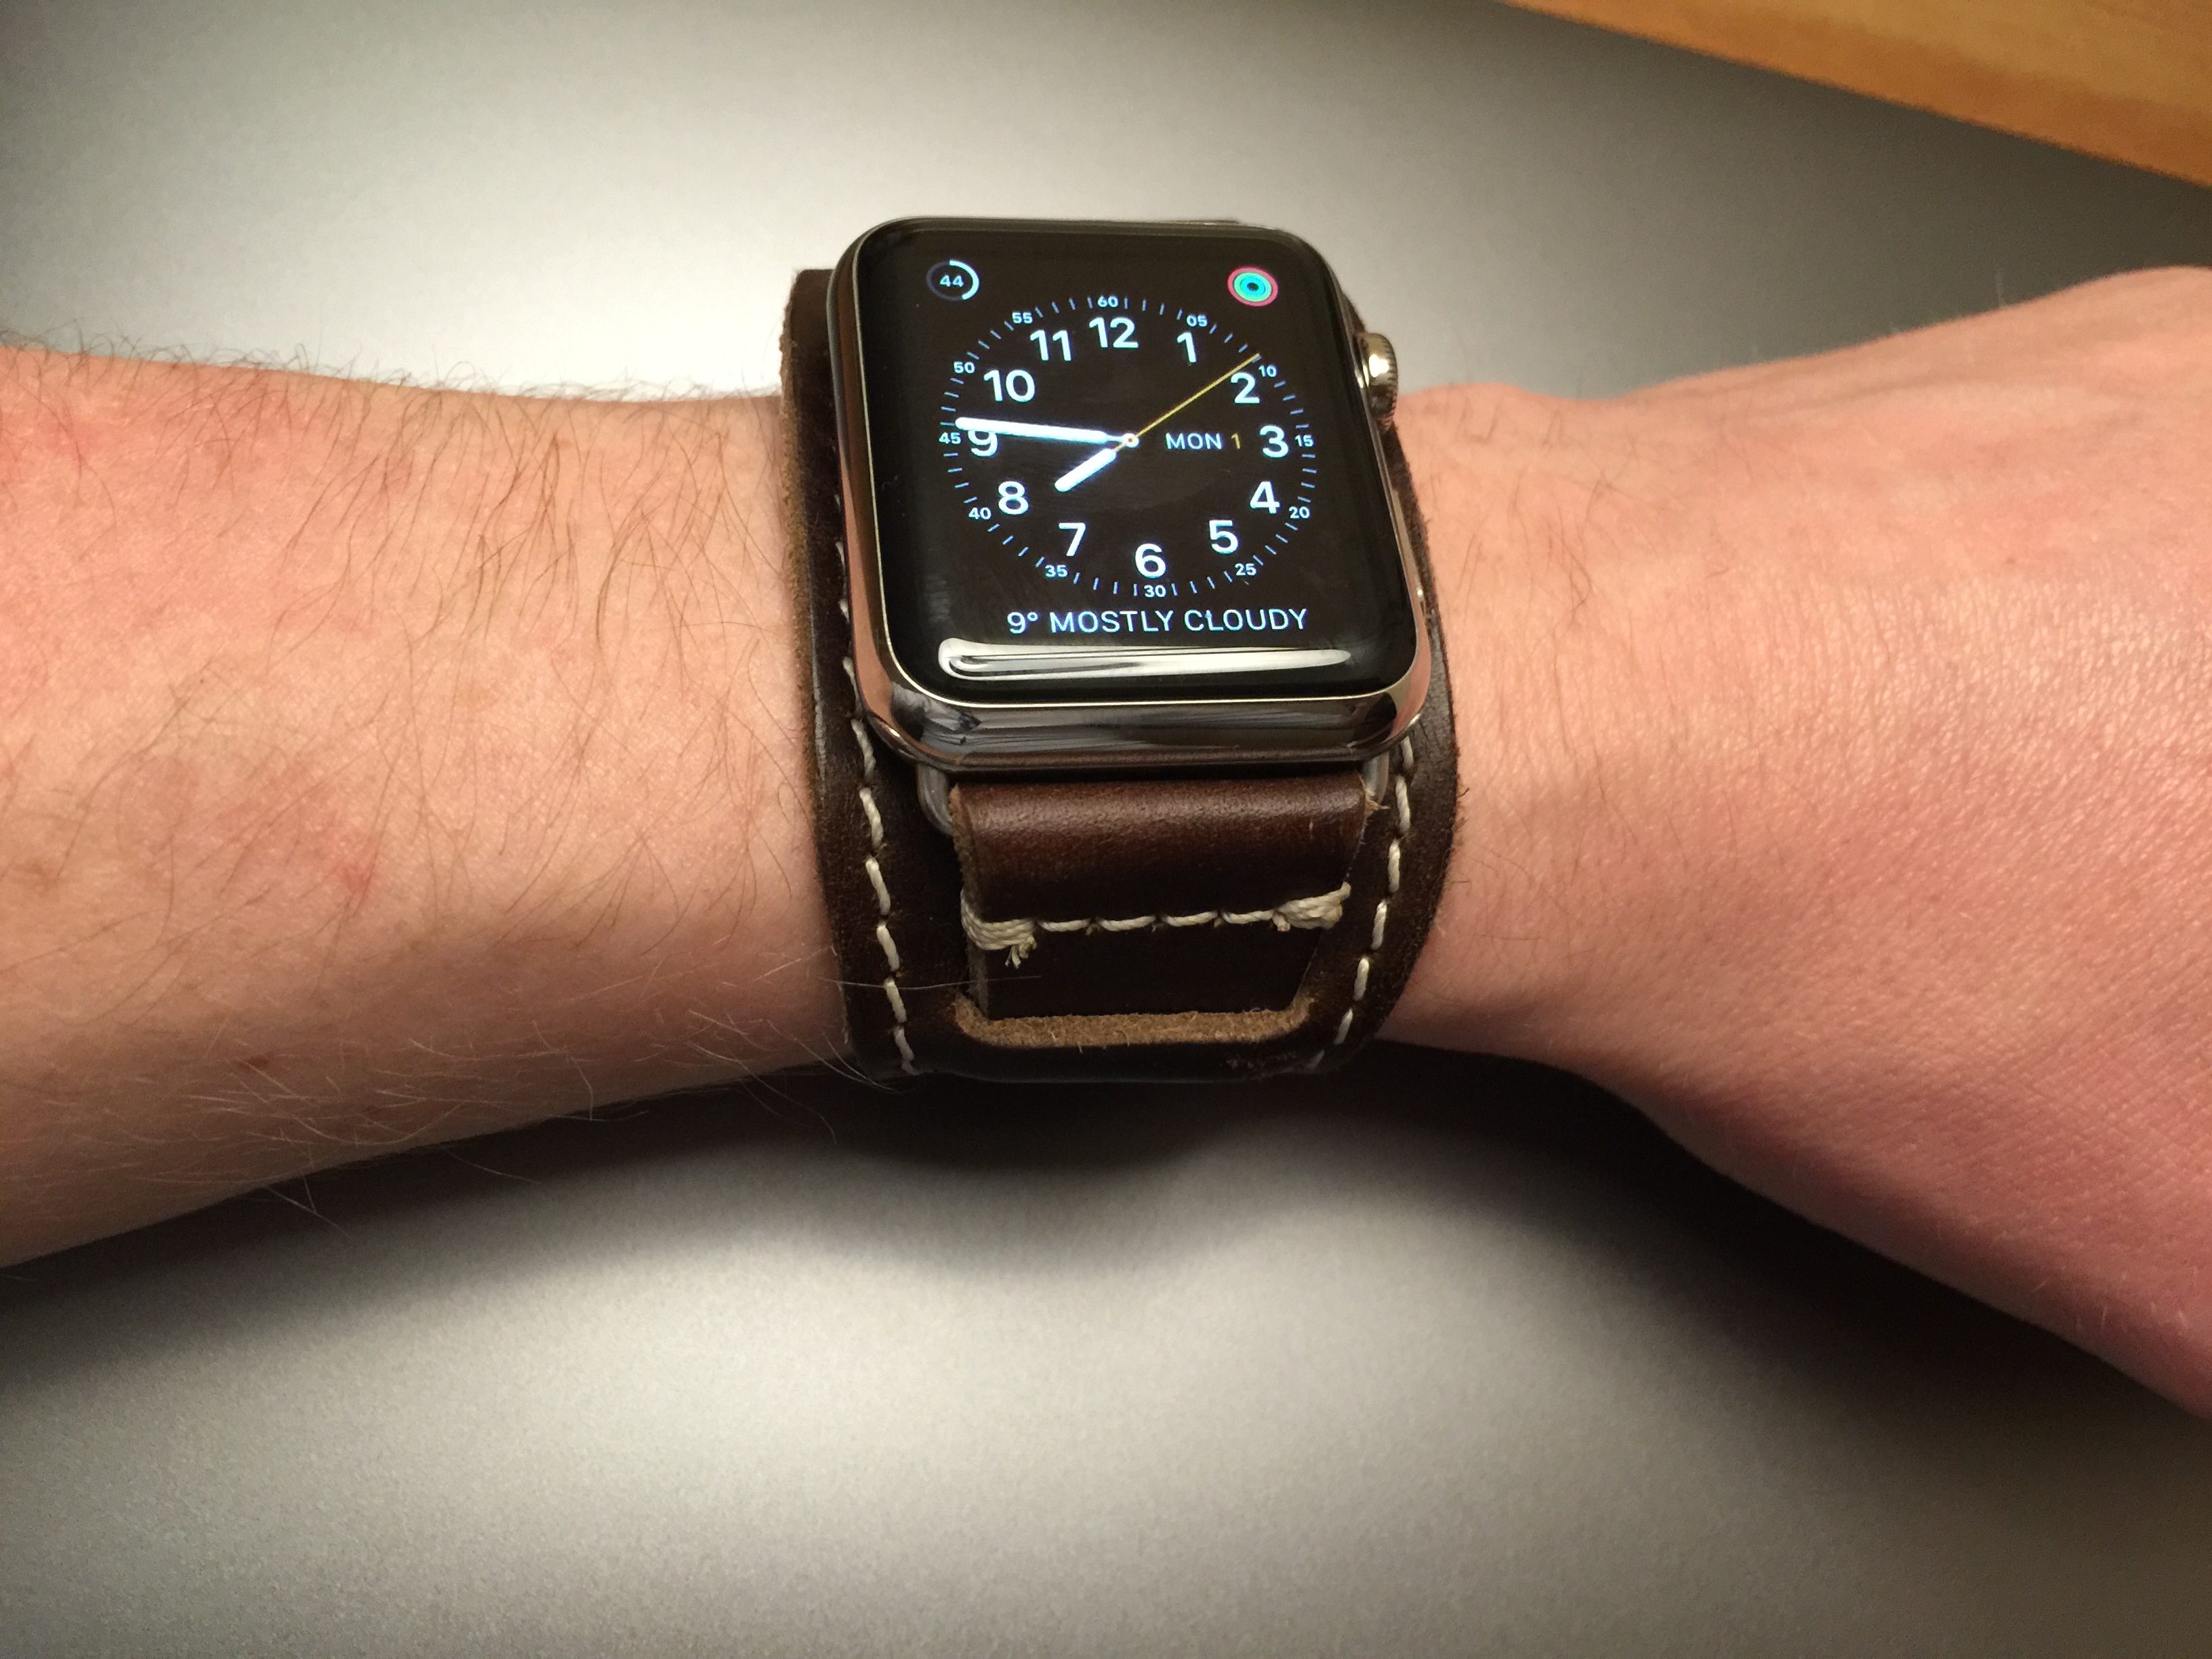 Pad and Quill's Lowry Cuff has become my new favorite Apple Watch band